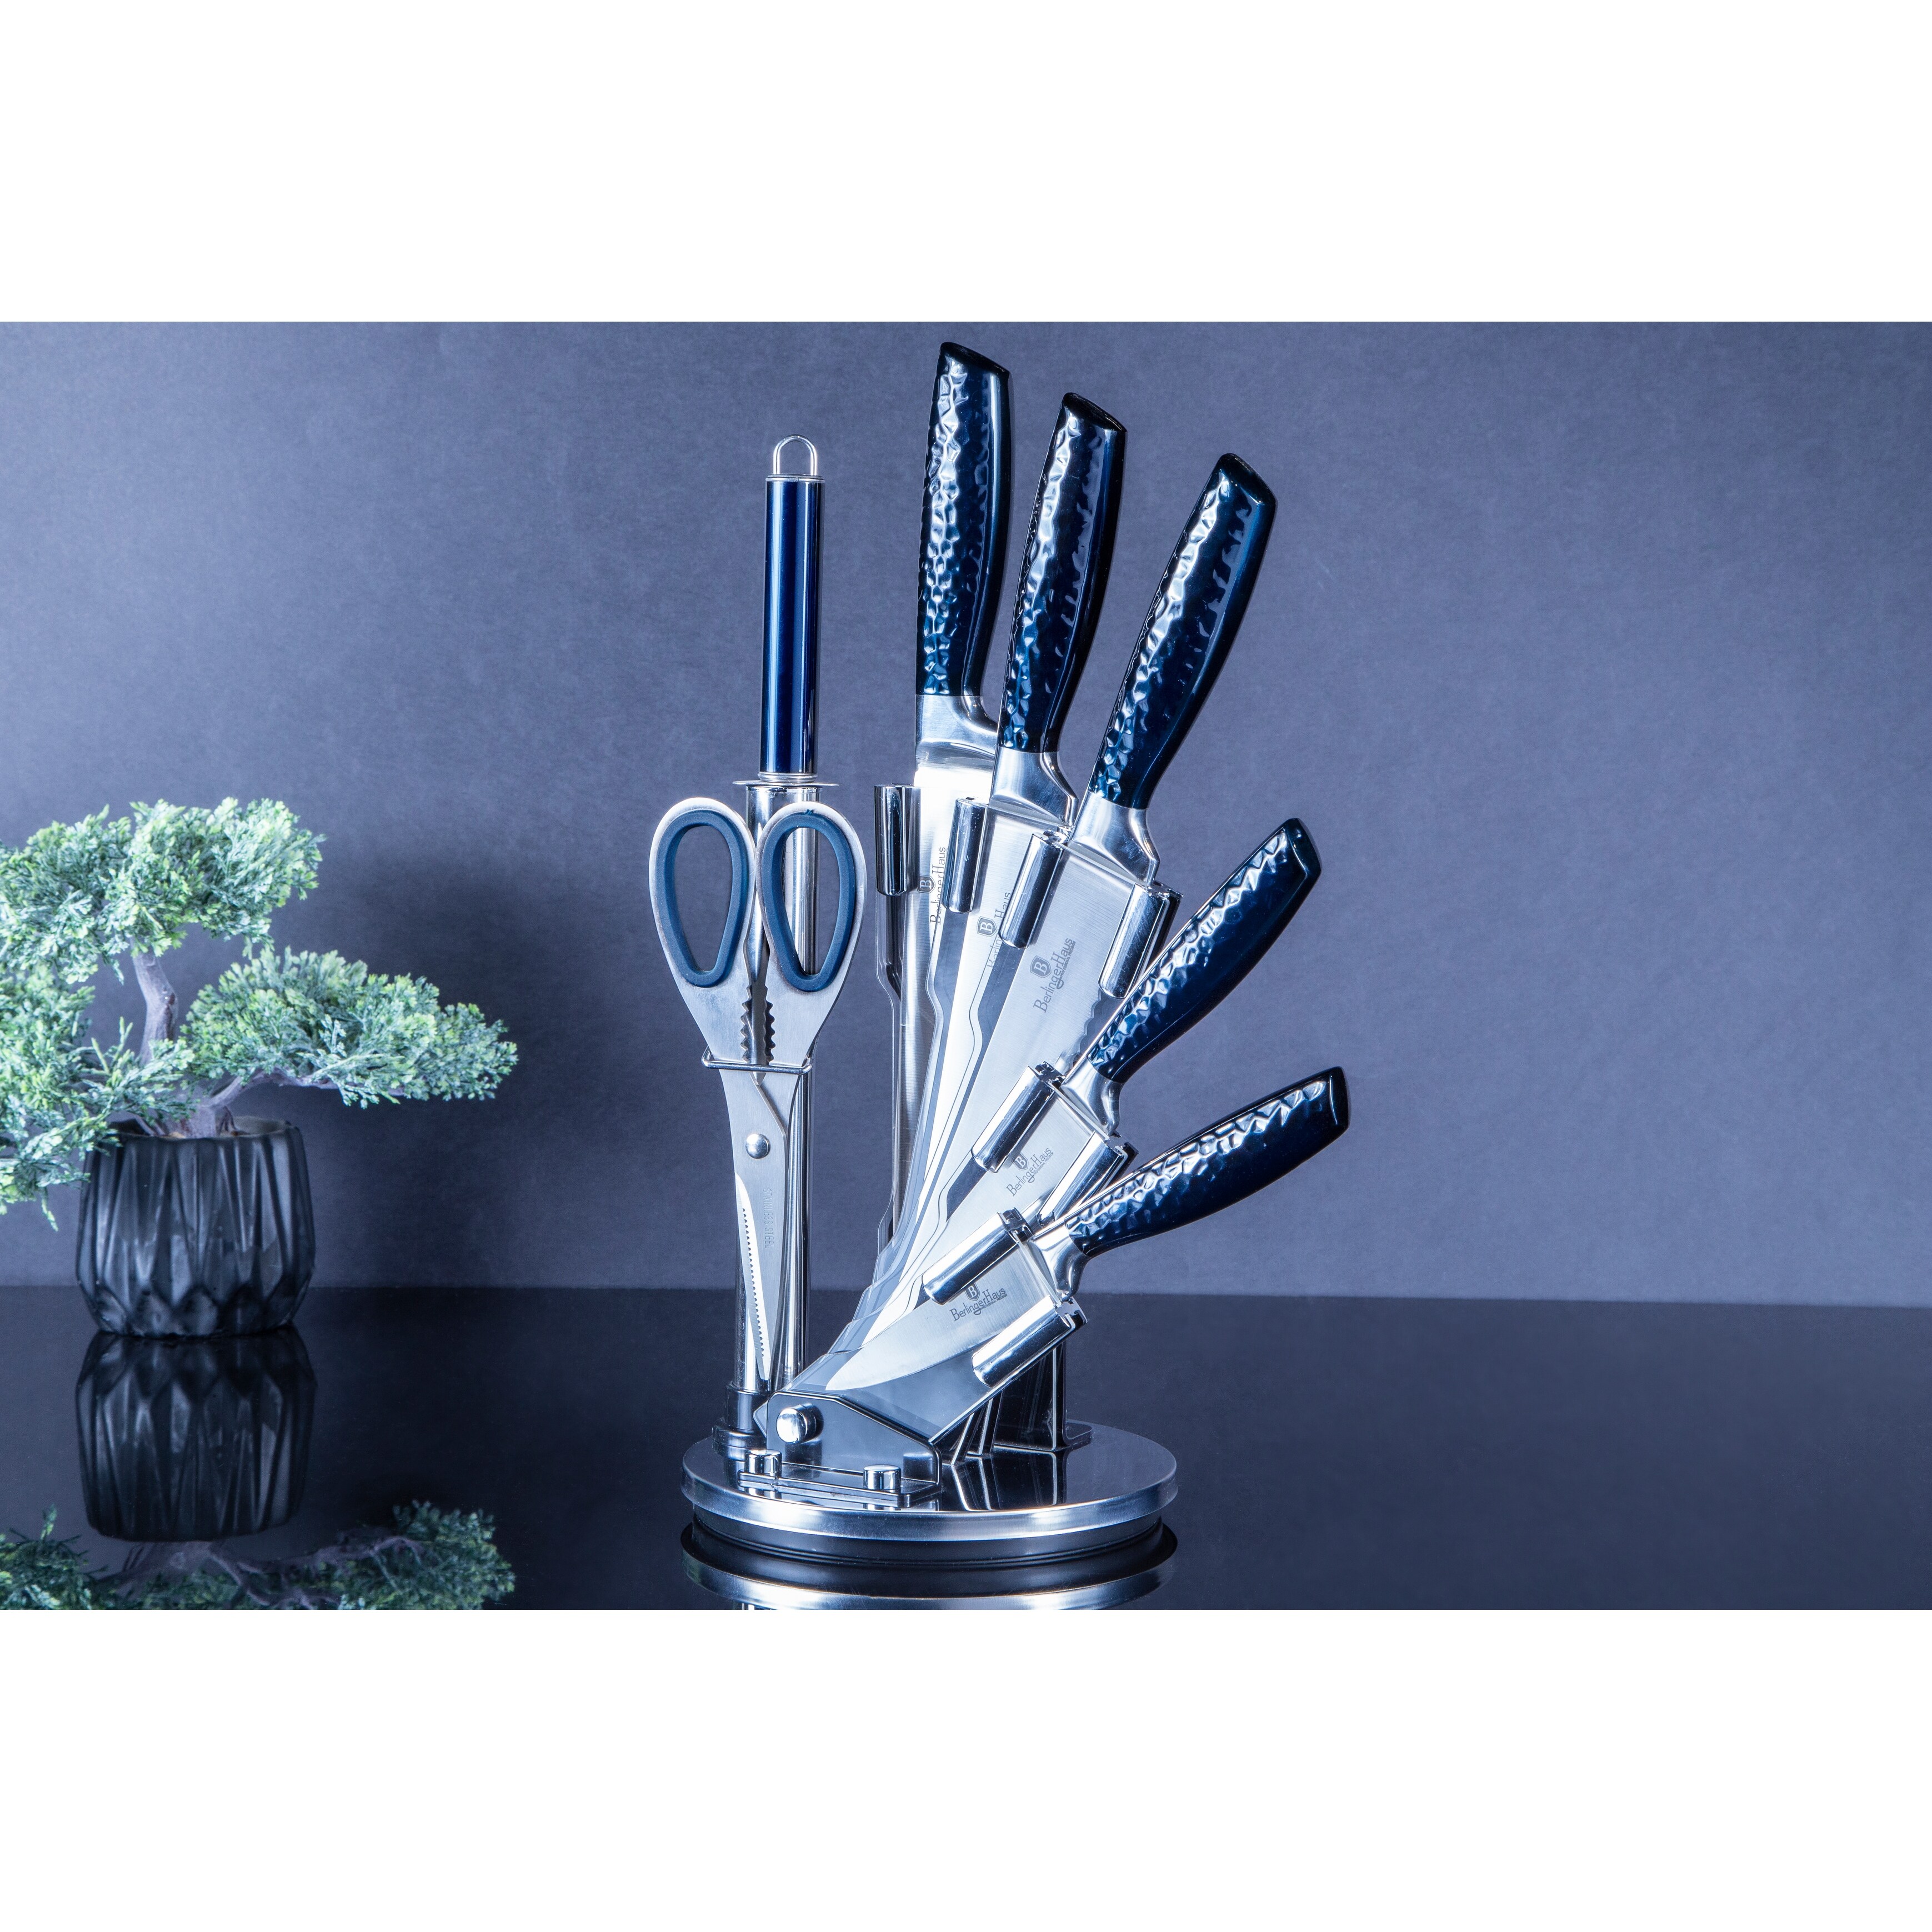 https://ak1.ostkcdn.com/images/products/is/images/direct/24beb41067708f93c60cadbda65ae52a79580c89/Berlinger-Haus-8-Piece-Knife-Set-with-Acrylic-Stand%2C-Aquamarine-Collection.jpg